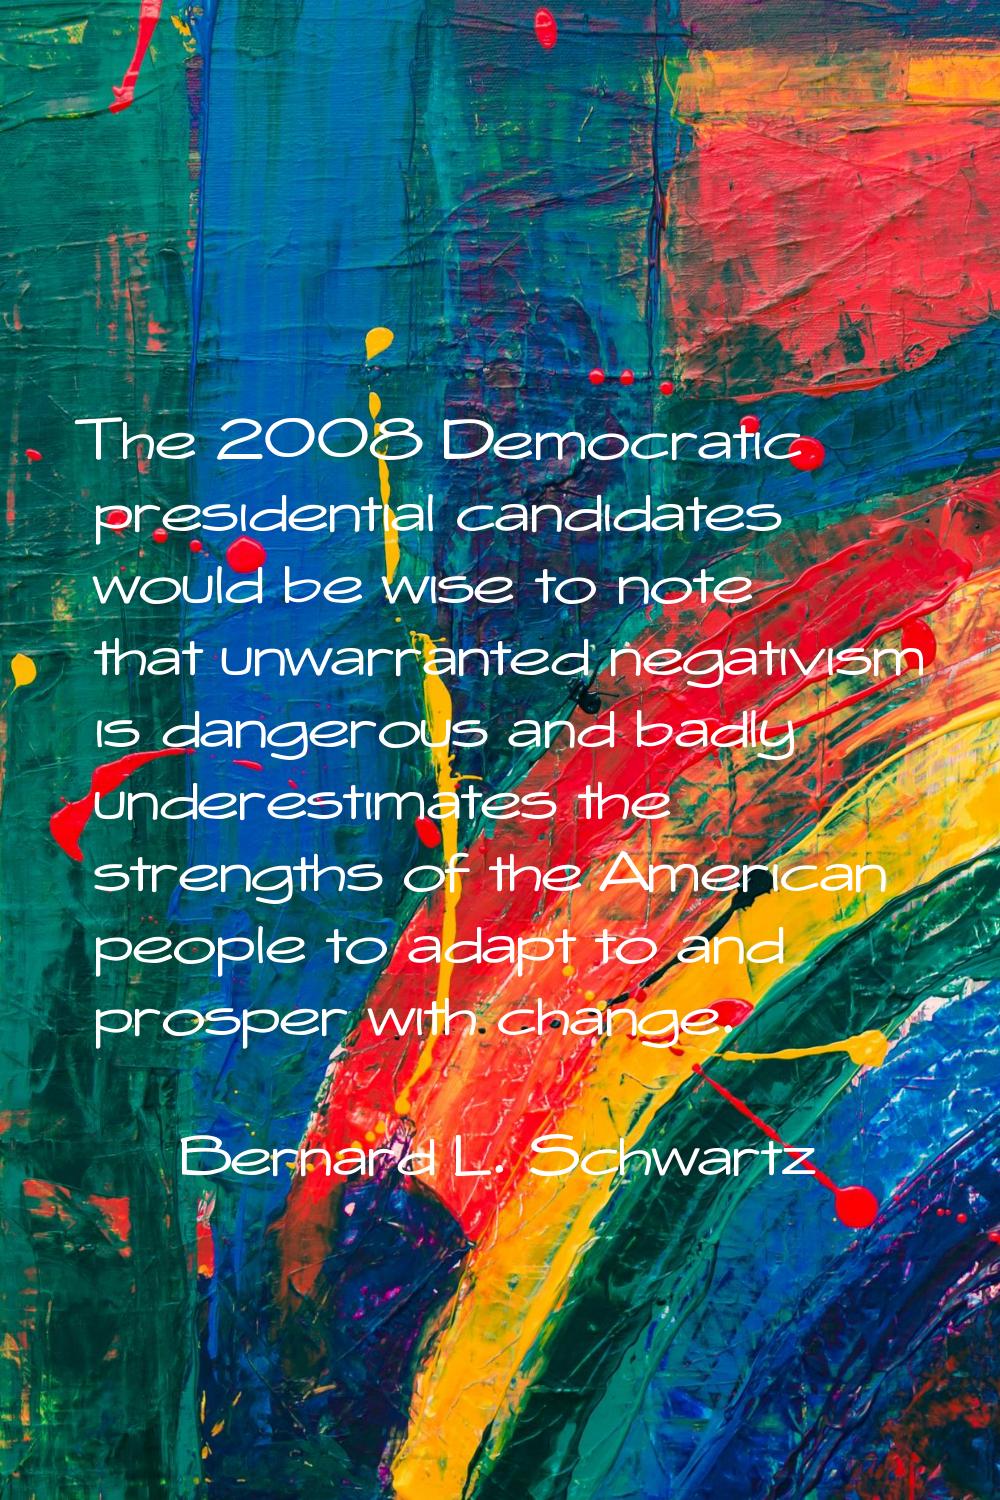 The 2008 Democratic presidential candidates would be wise to note that unwarranted negativism is da